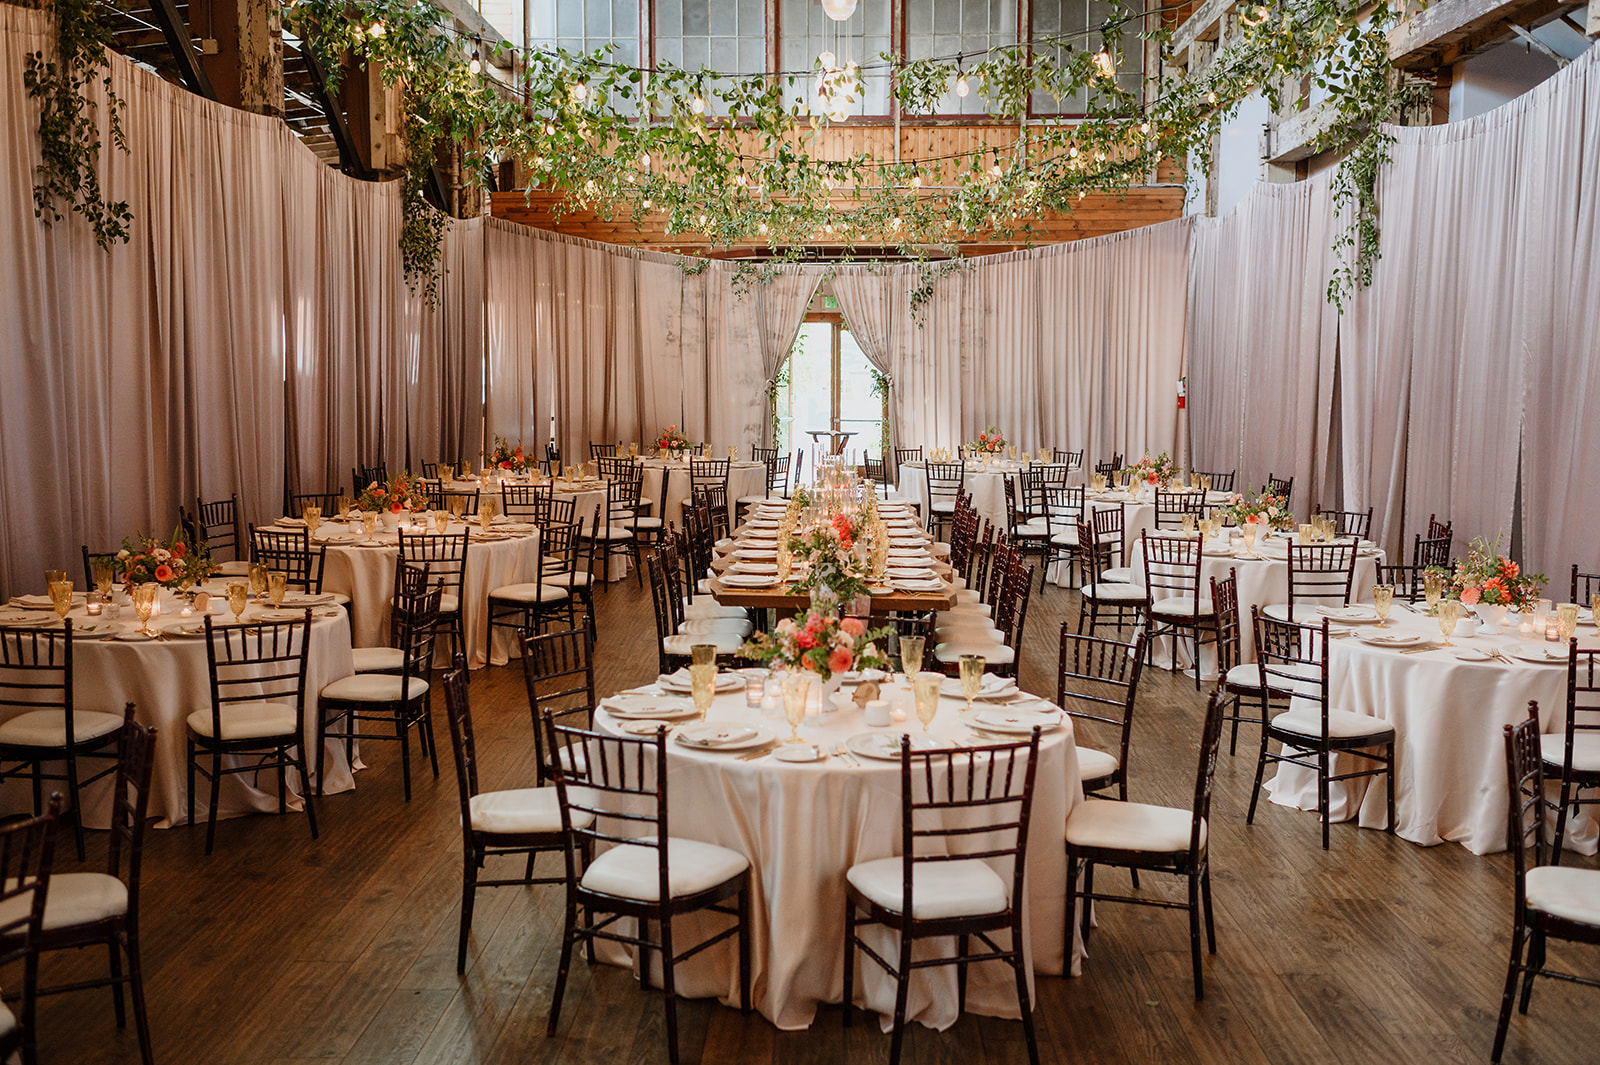 Elegantly decorated reception space with round tables, floral centerpieces, and string lights at Sodo Park.